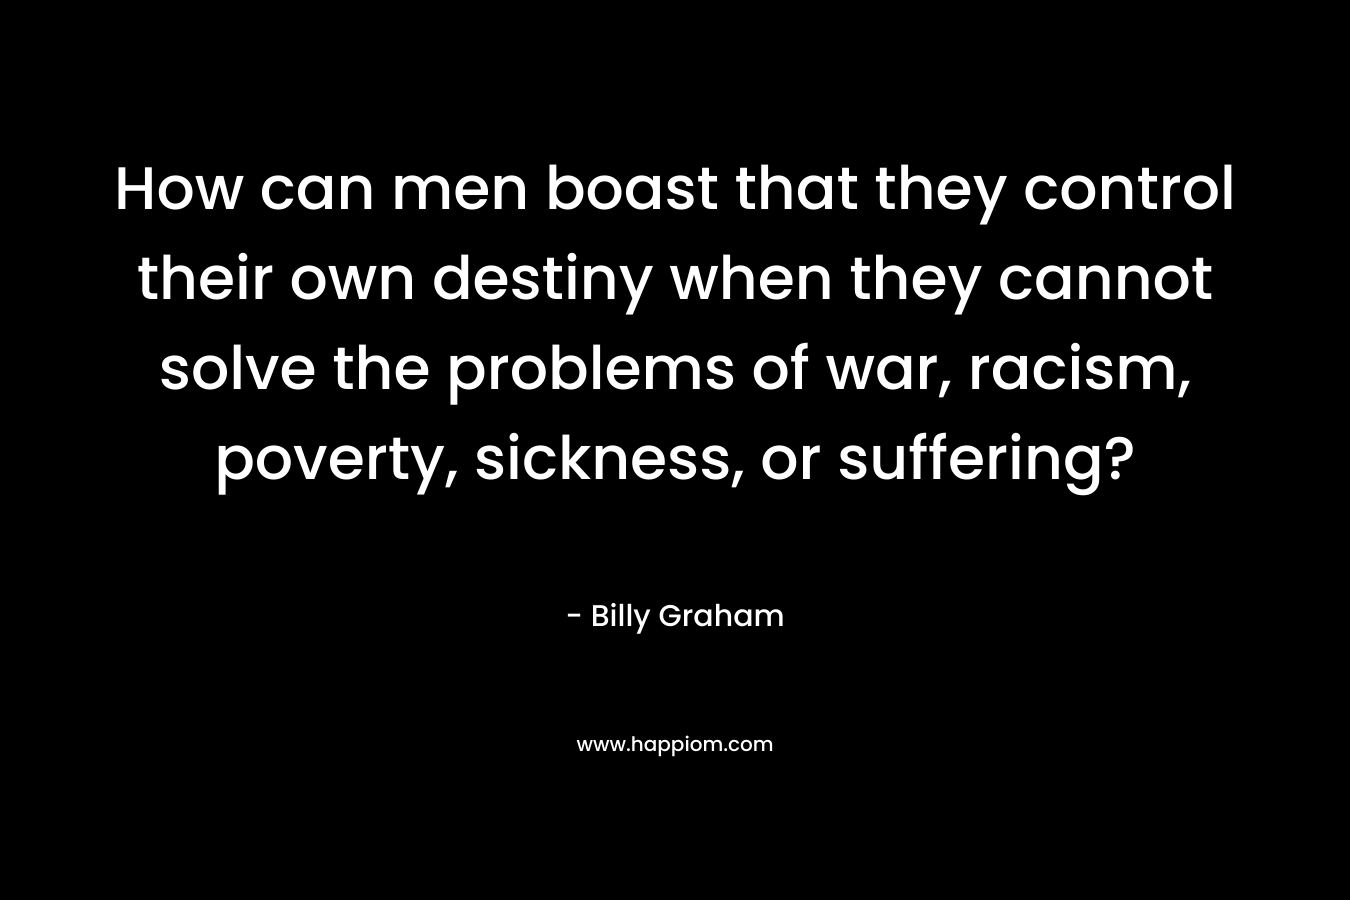 How can men boast that they control their own destiny when they cannot solve the problems of war, racism, poverty, sickness, or suffering?